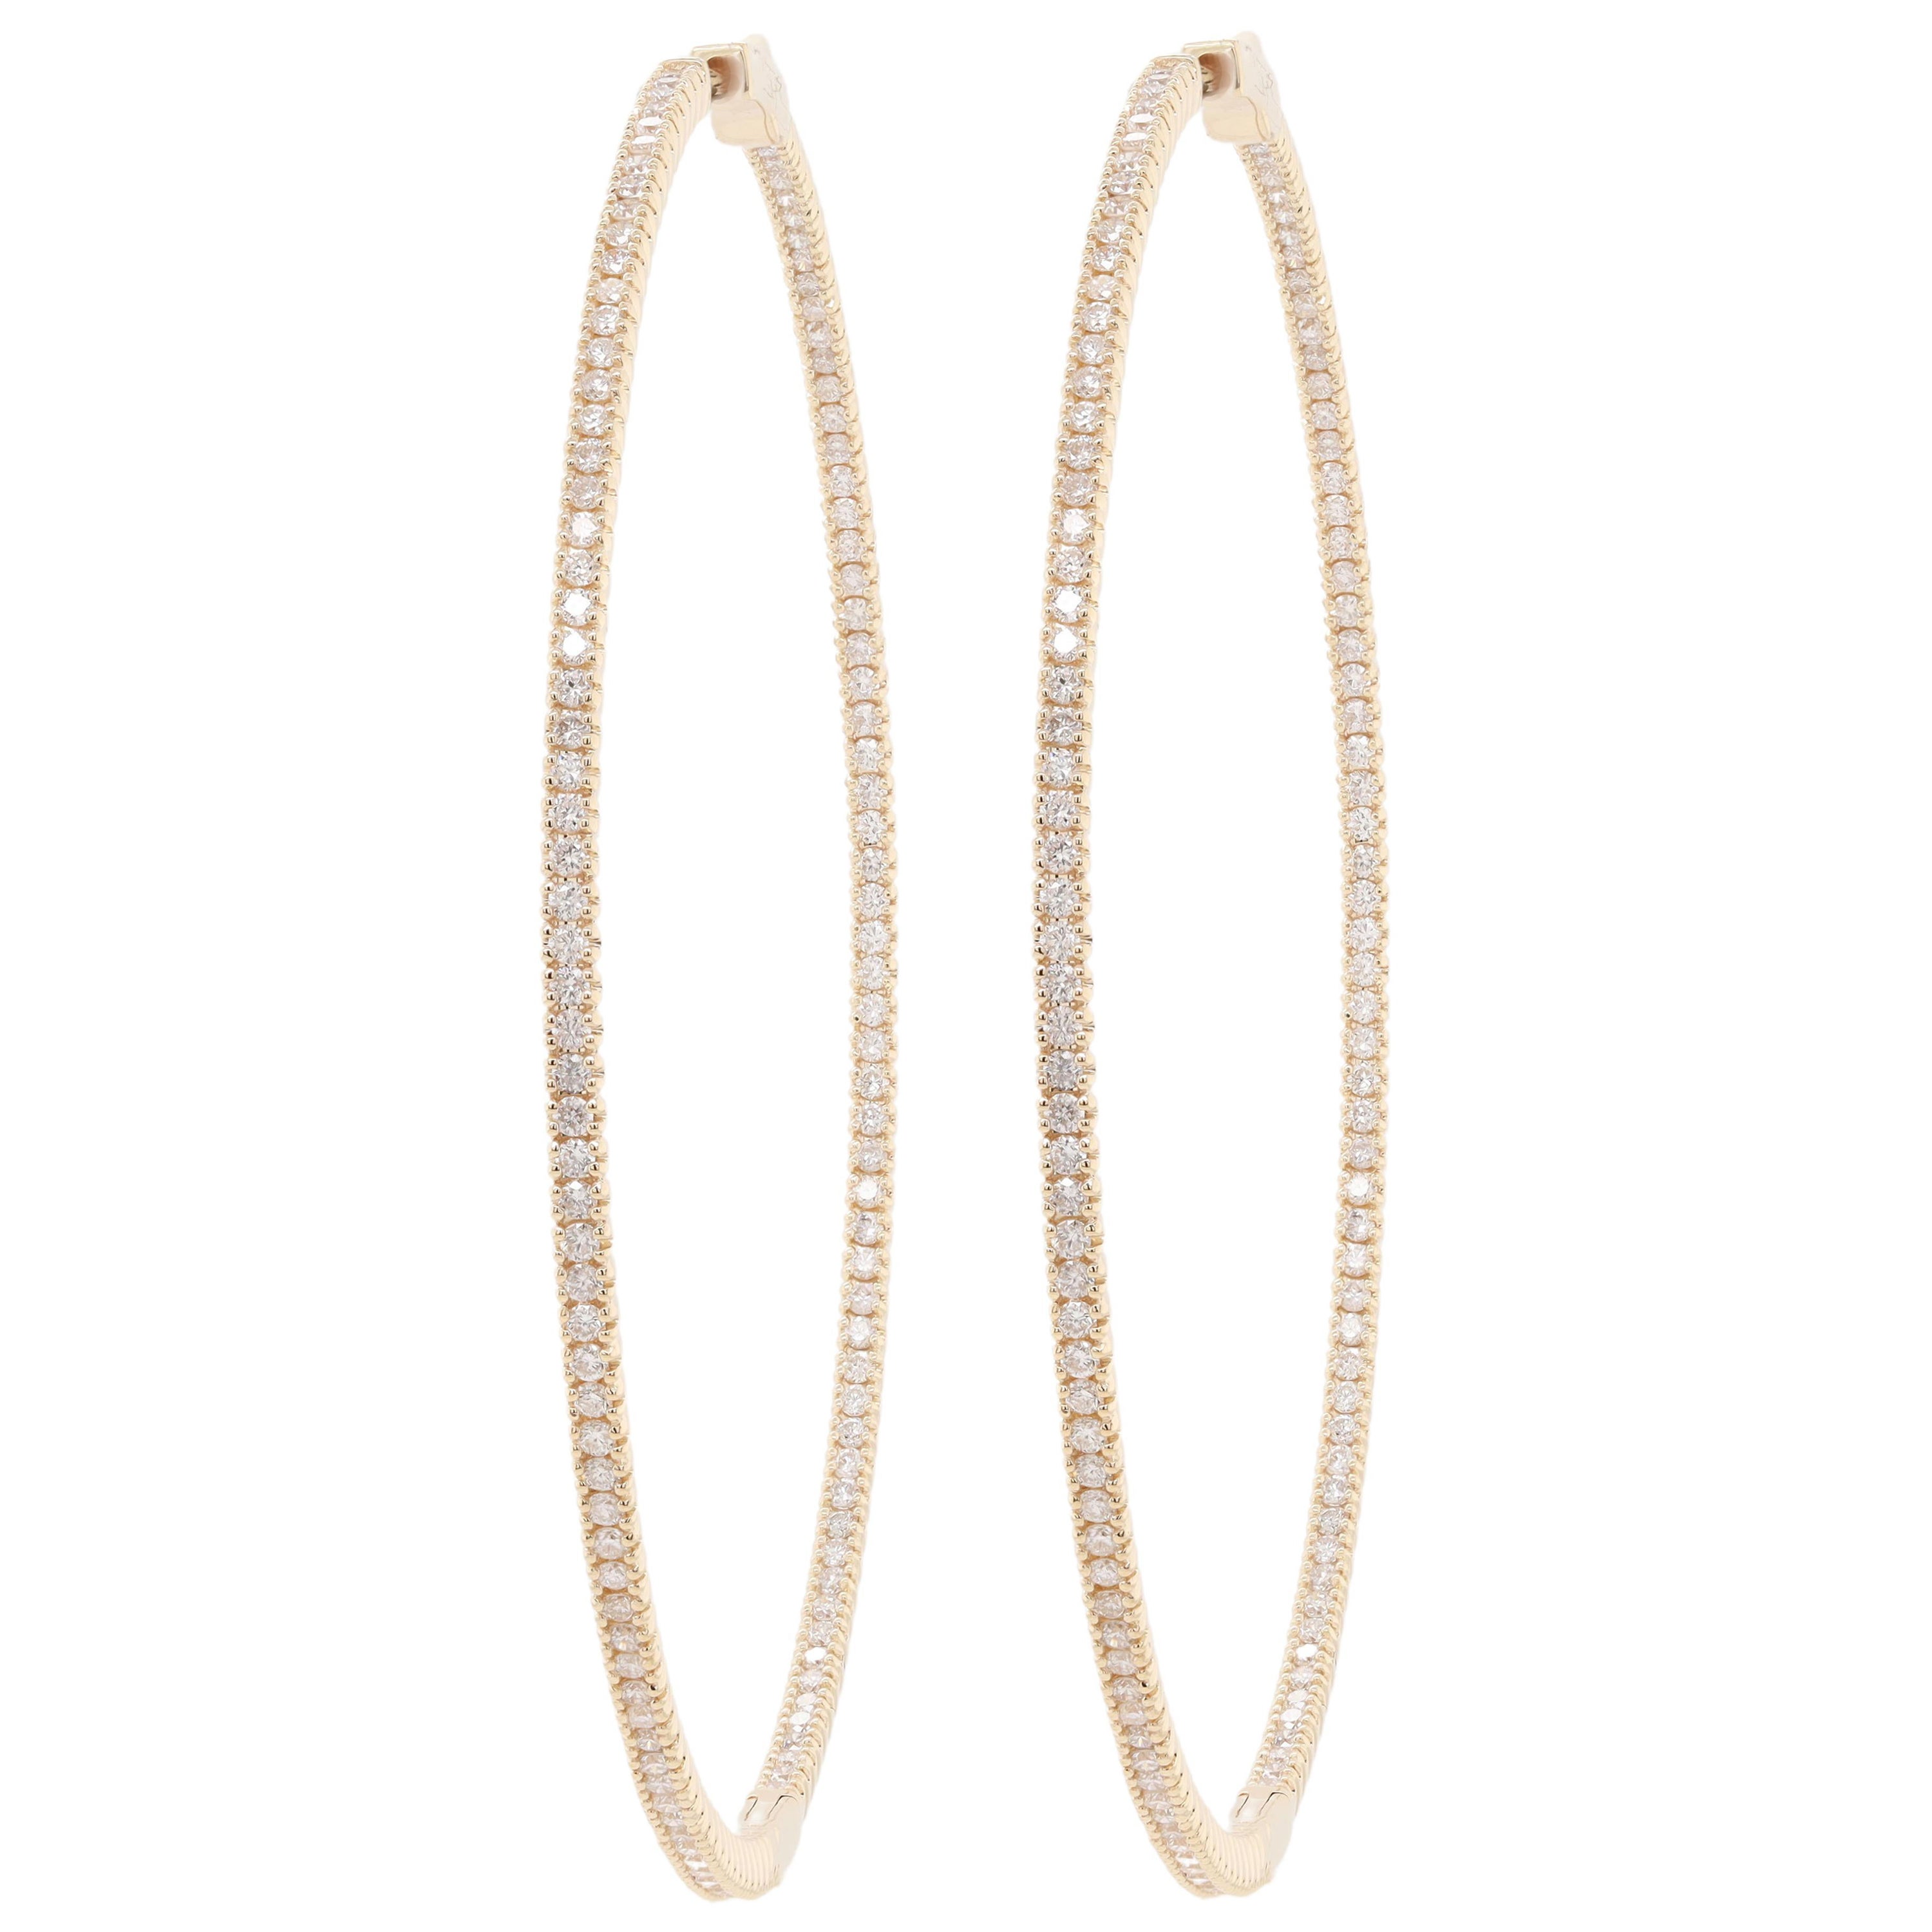 Diana M. 14kt yellow gold, 1.75" hoop earrings featuring 1.30cts round diamonds For Sale